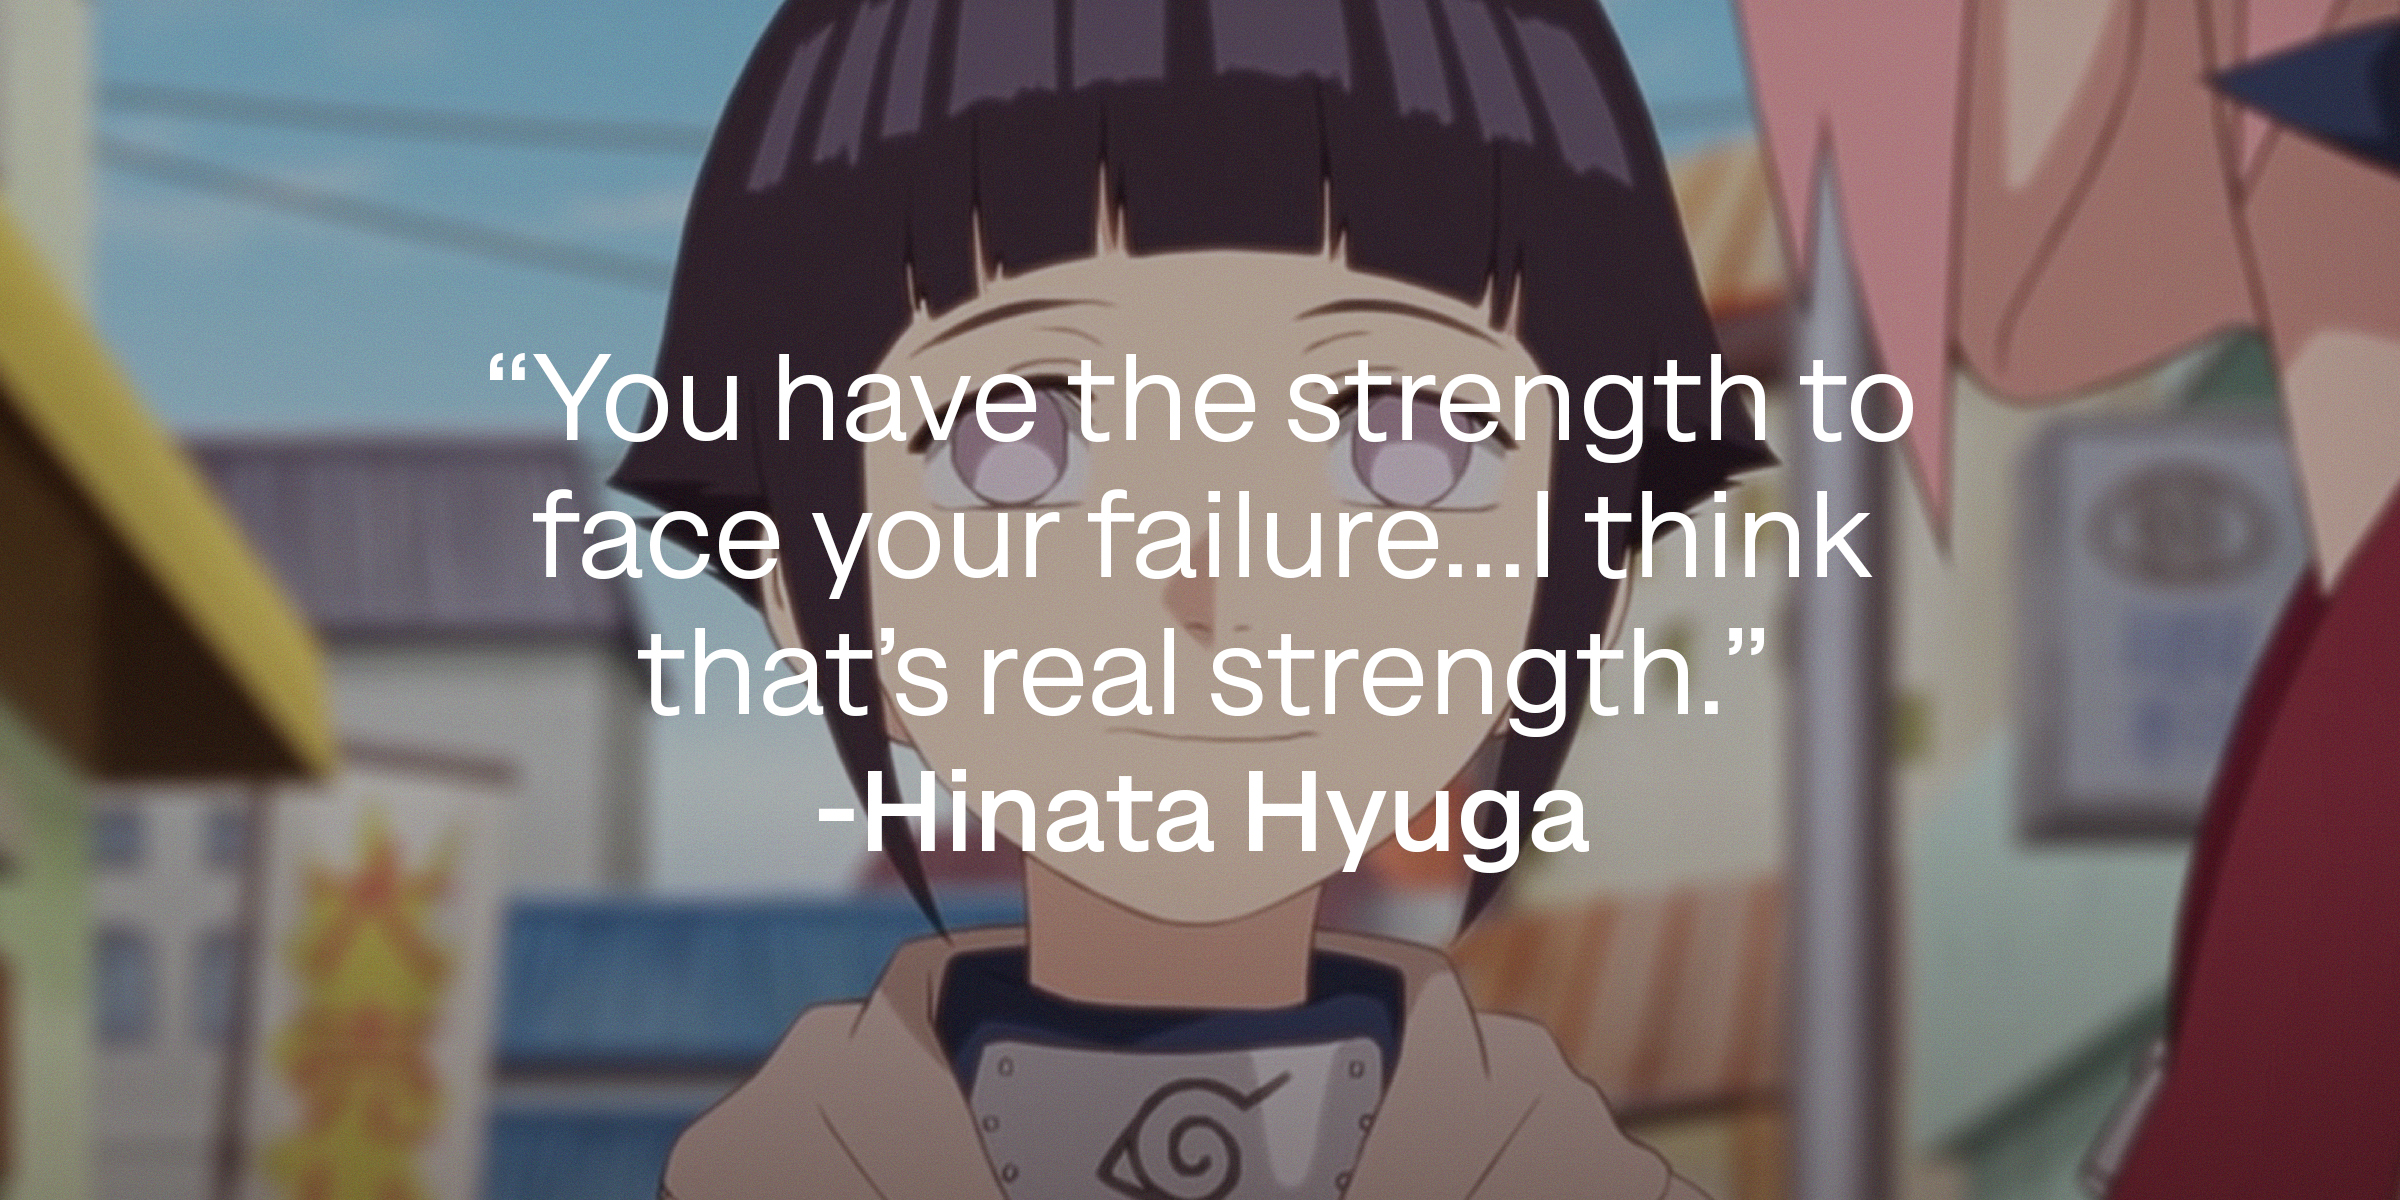 Hinata Hyuga as a child with her quote: “You have the strength to face your failure...I think that’s real strength." | Source: youtube.com/CrunchyrollCollectio